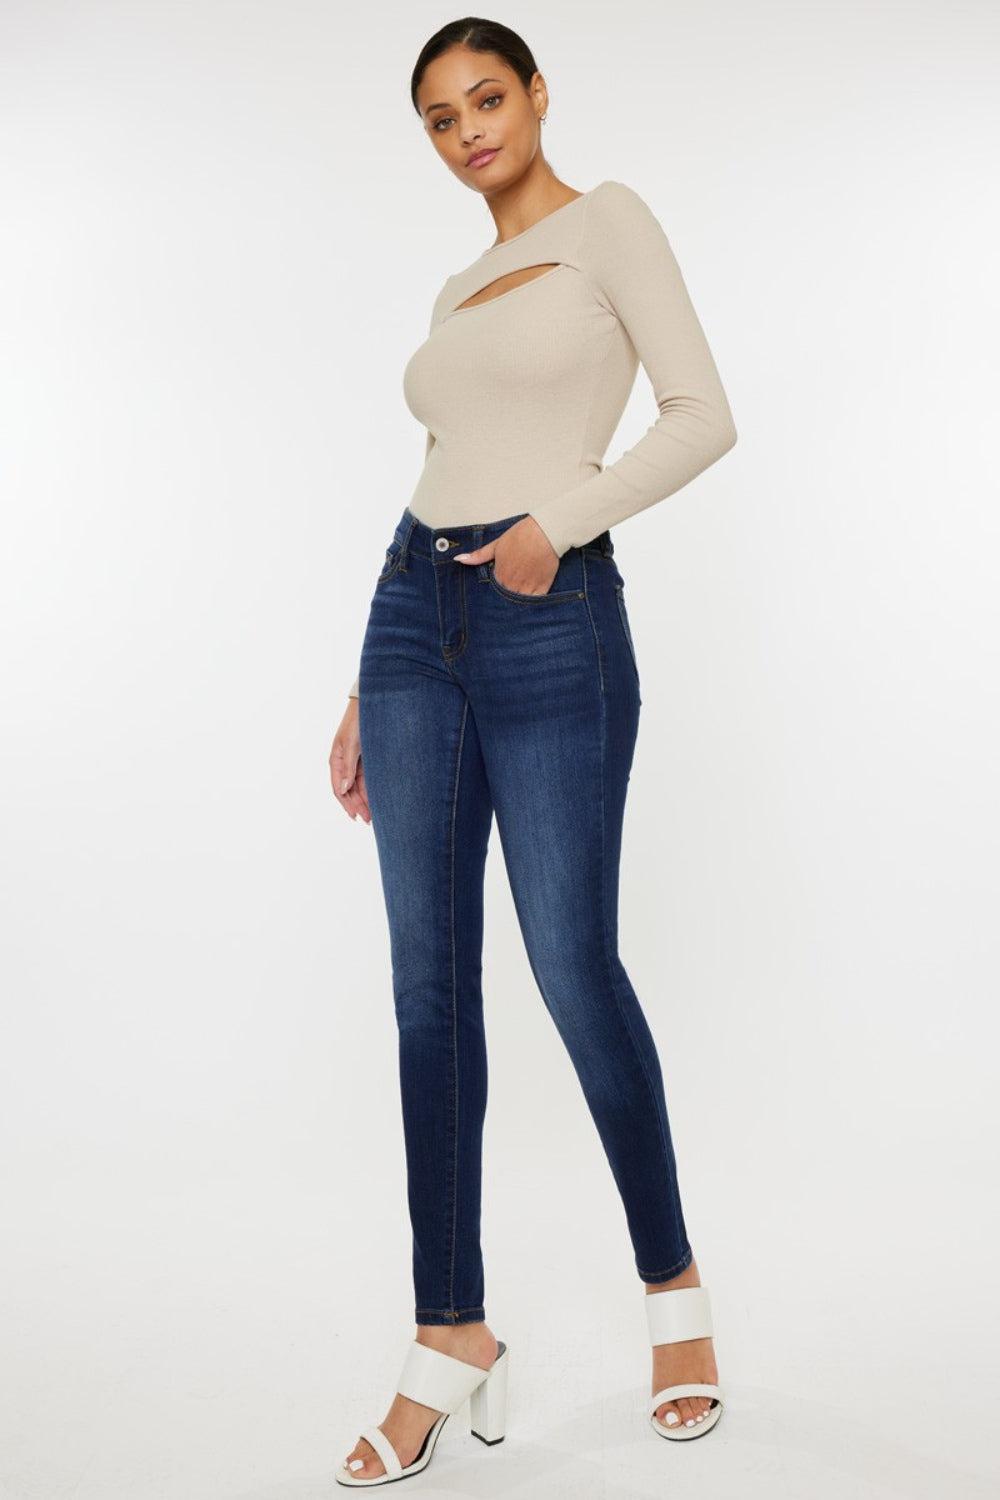 a woman in jeans and heels posing for the camera